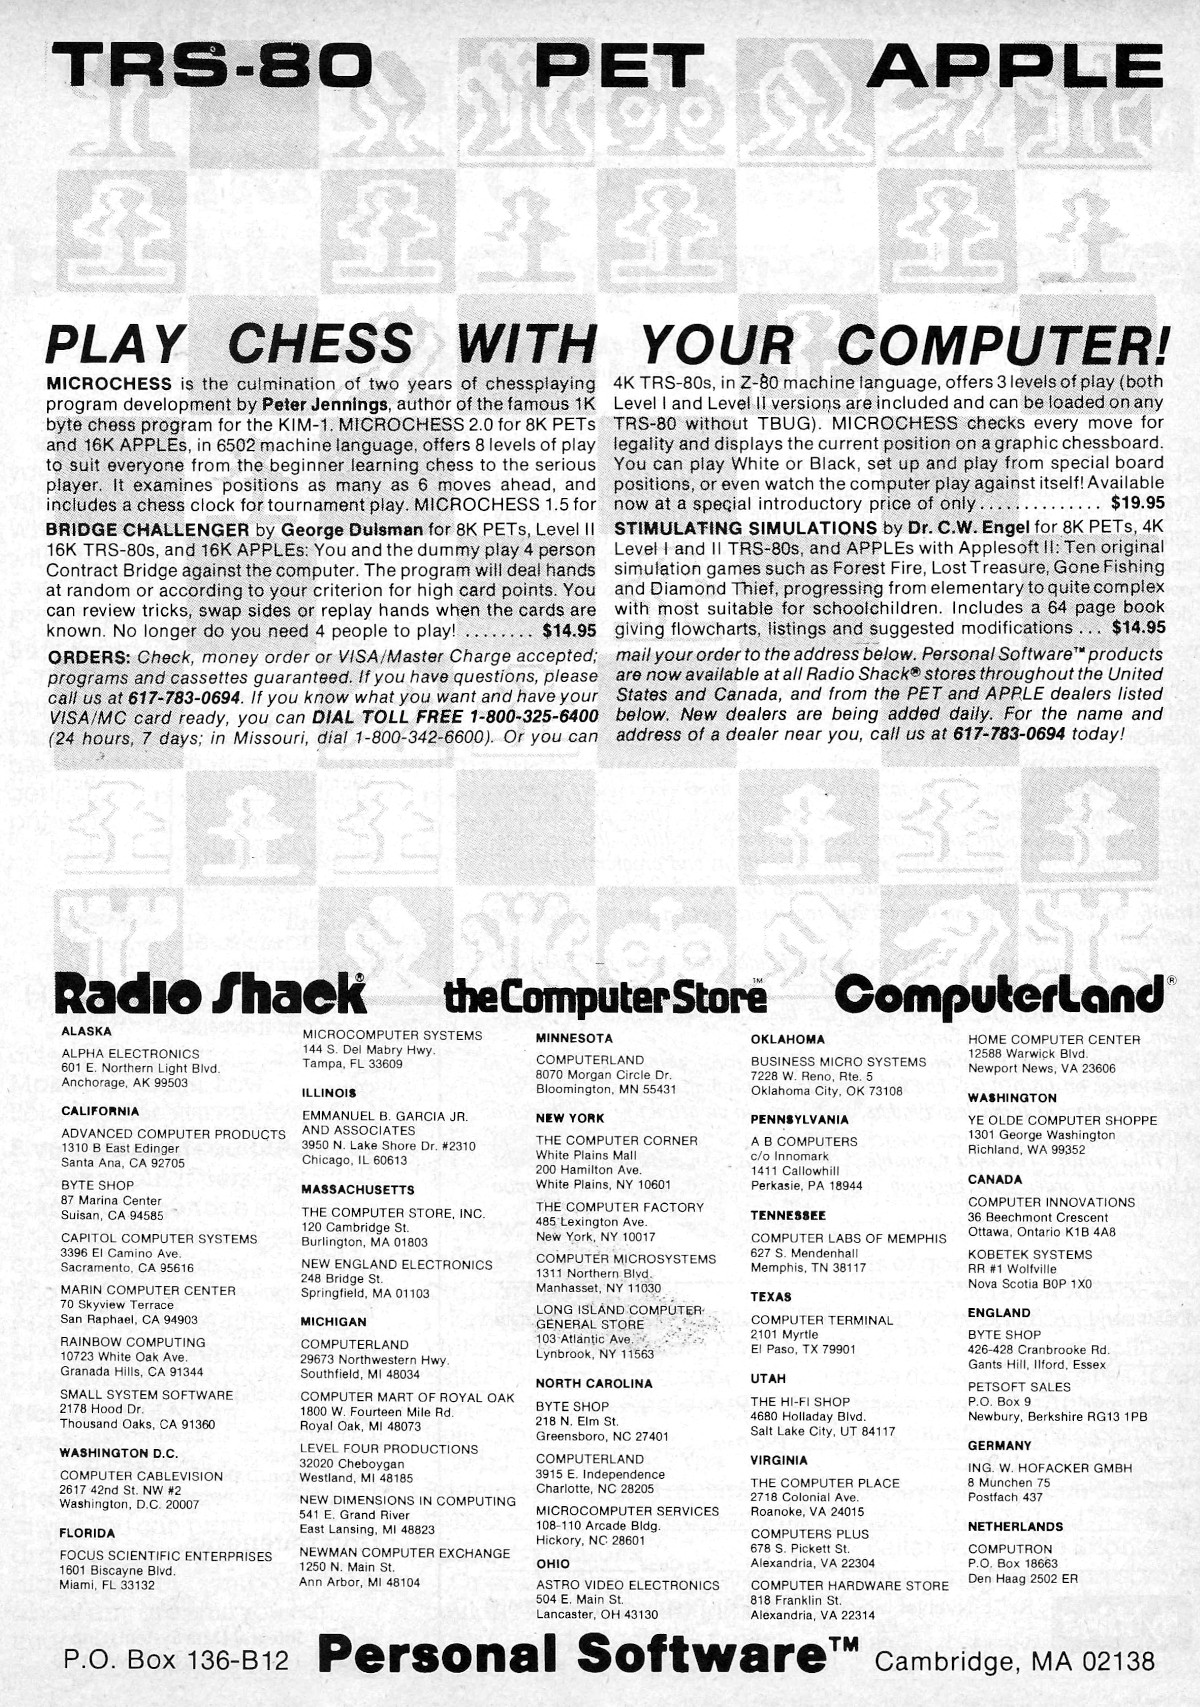 A Personal Software advert, including Microchess by Peter Jennings . From Byte, December 1978